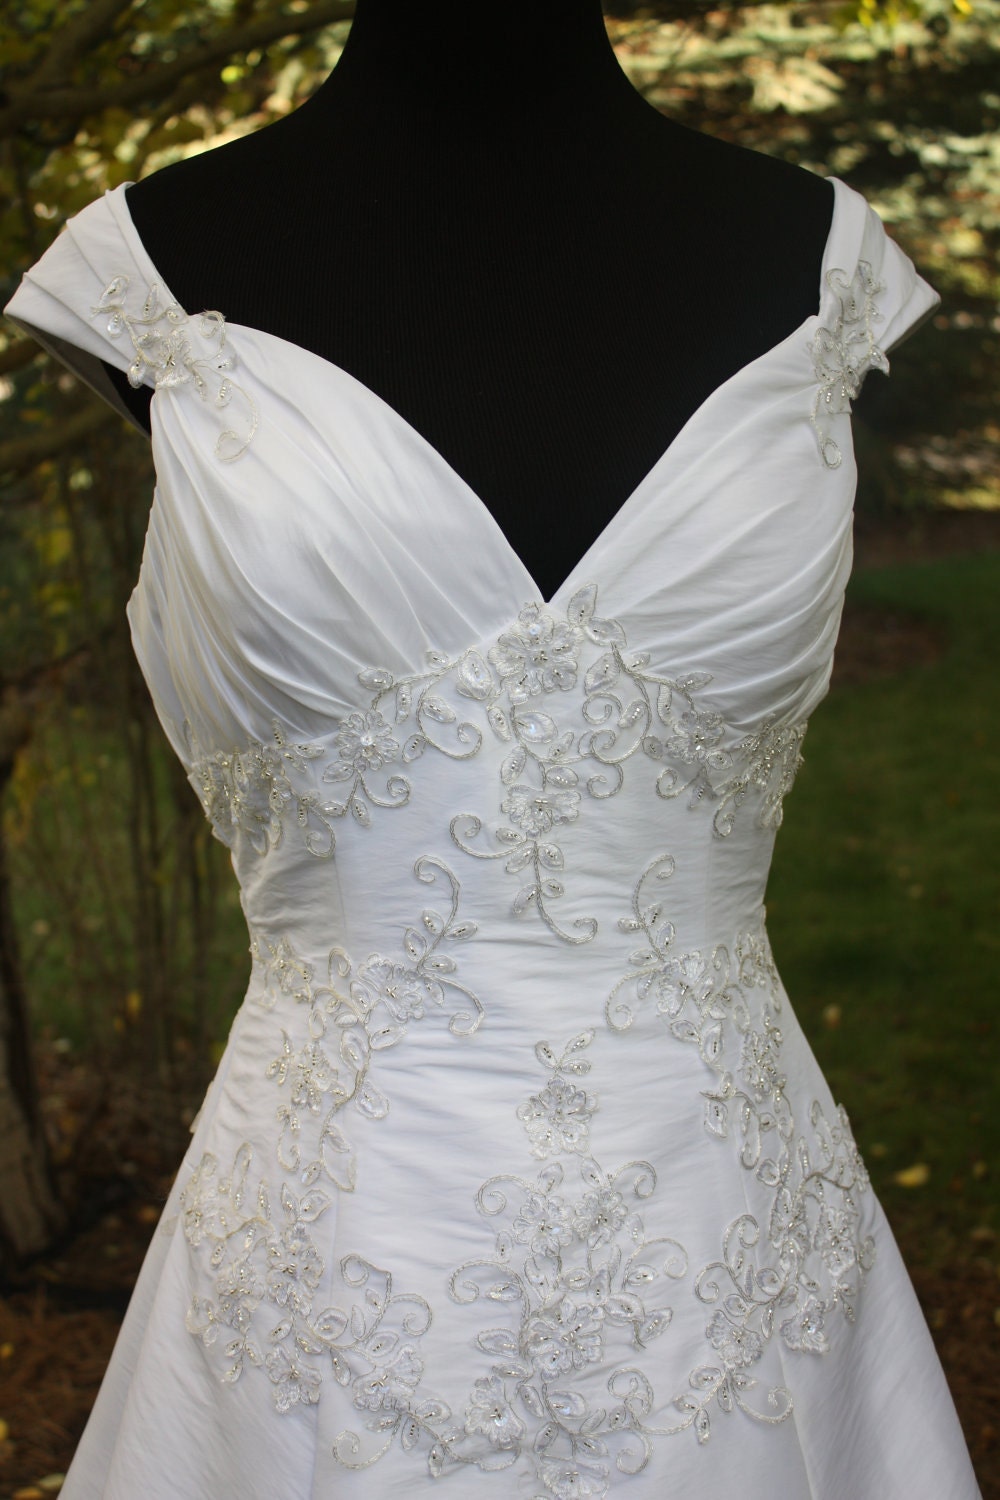 Handmade Wedding Dress Embroidery and Beaded Applique Accent on Bodice